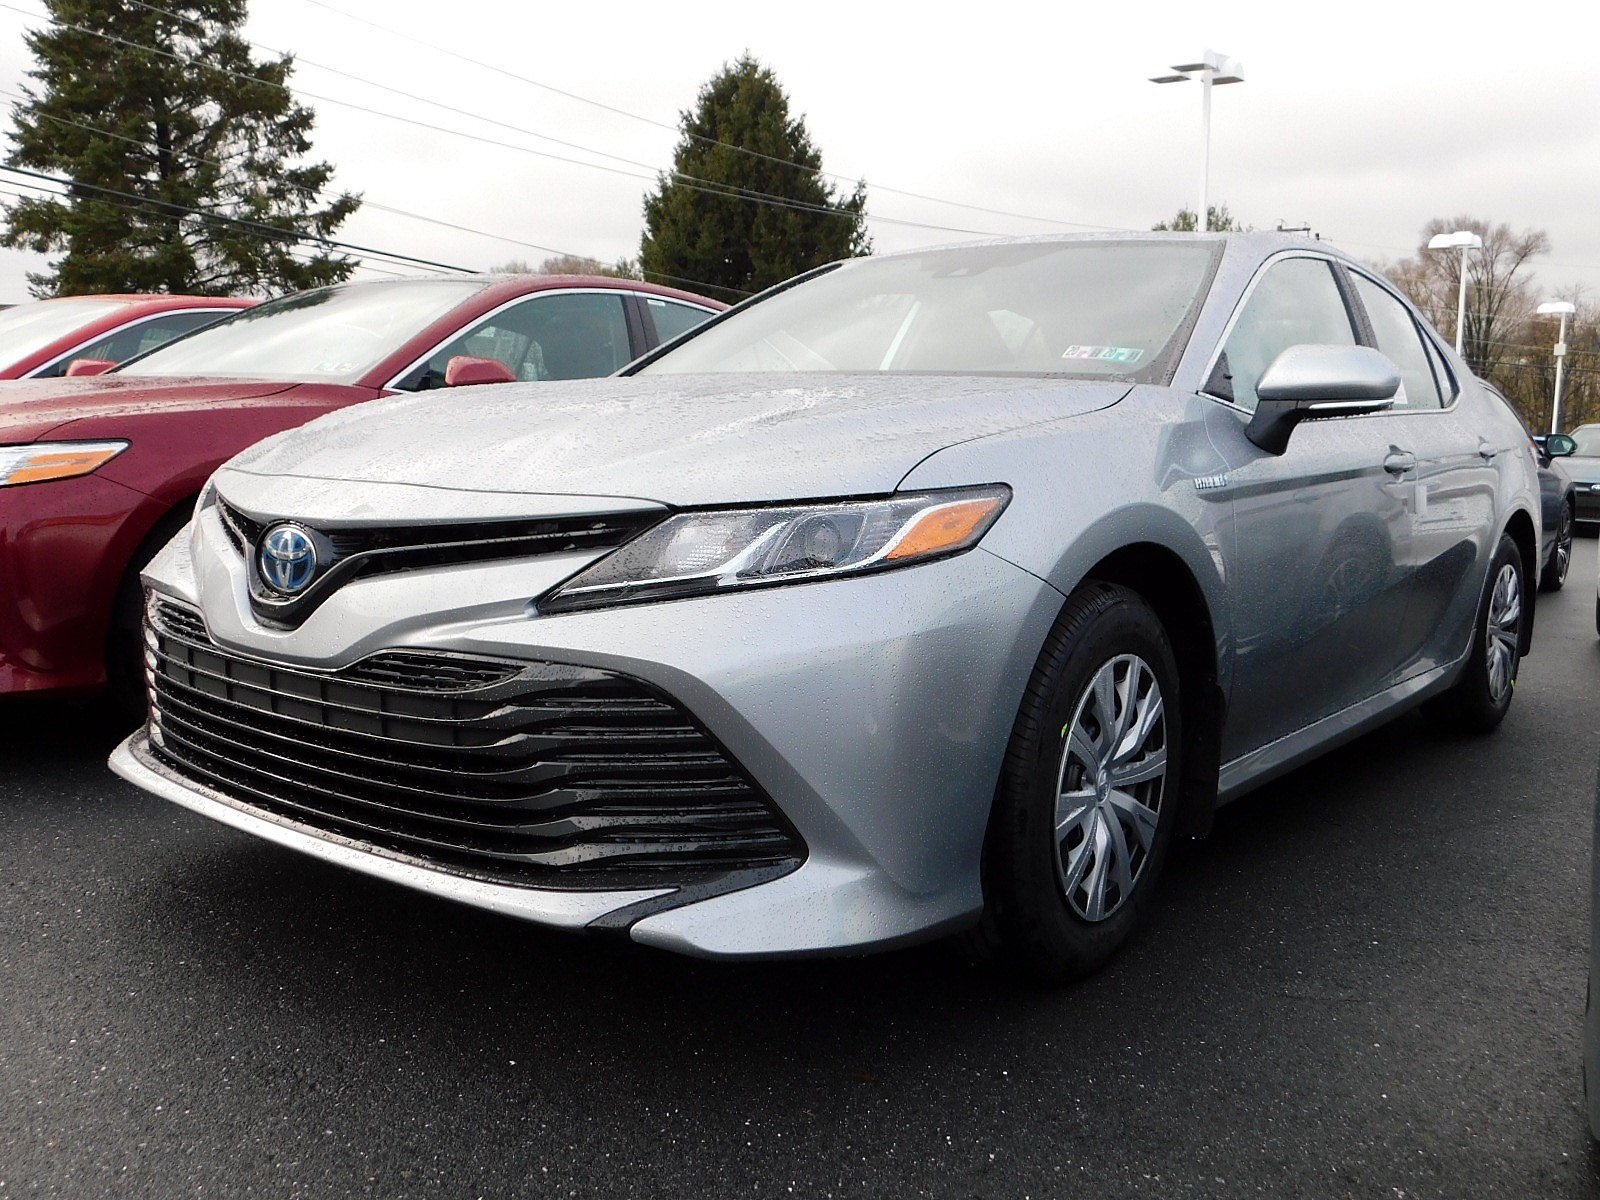 New 2020 Toyota Camry Hybrid Hybrid LE 4dr Car in East Petersburg ...
